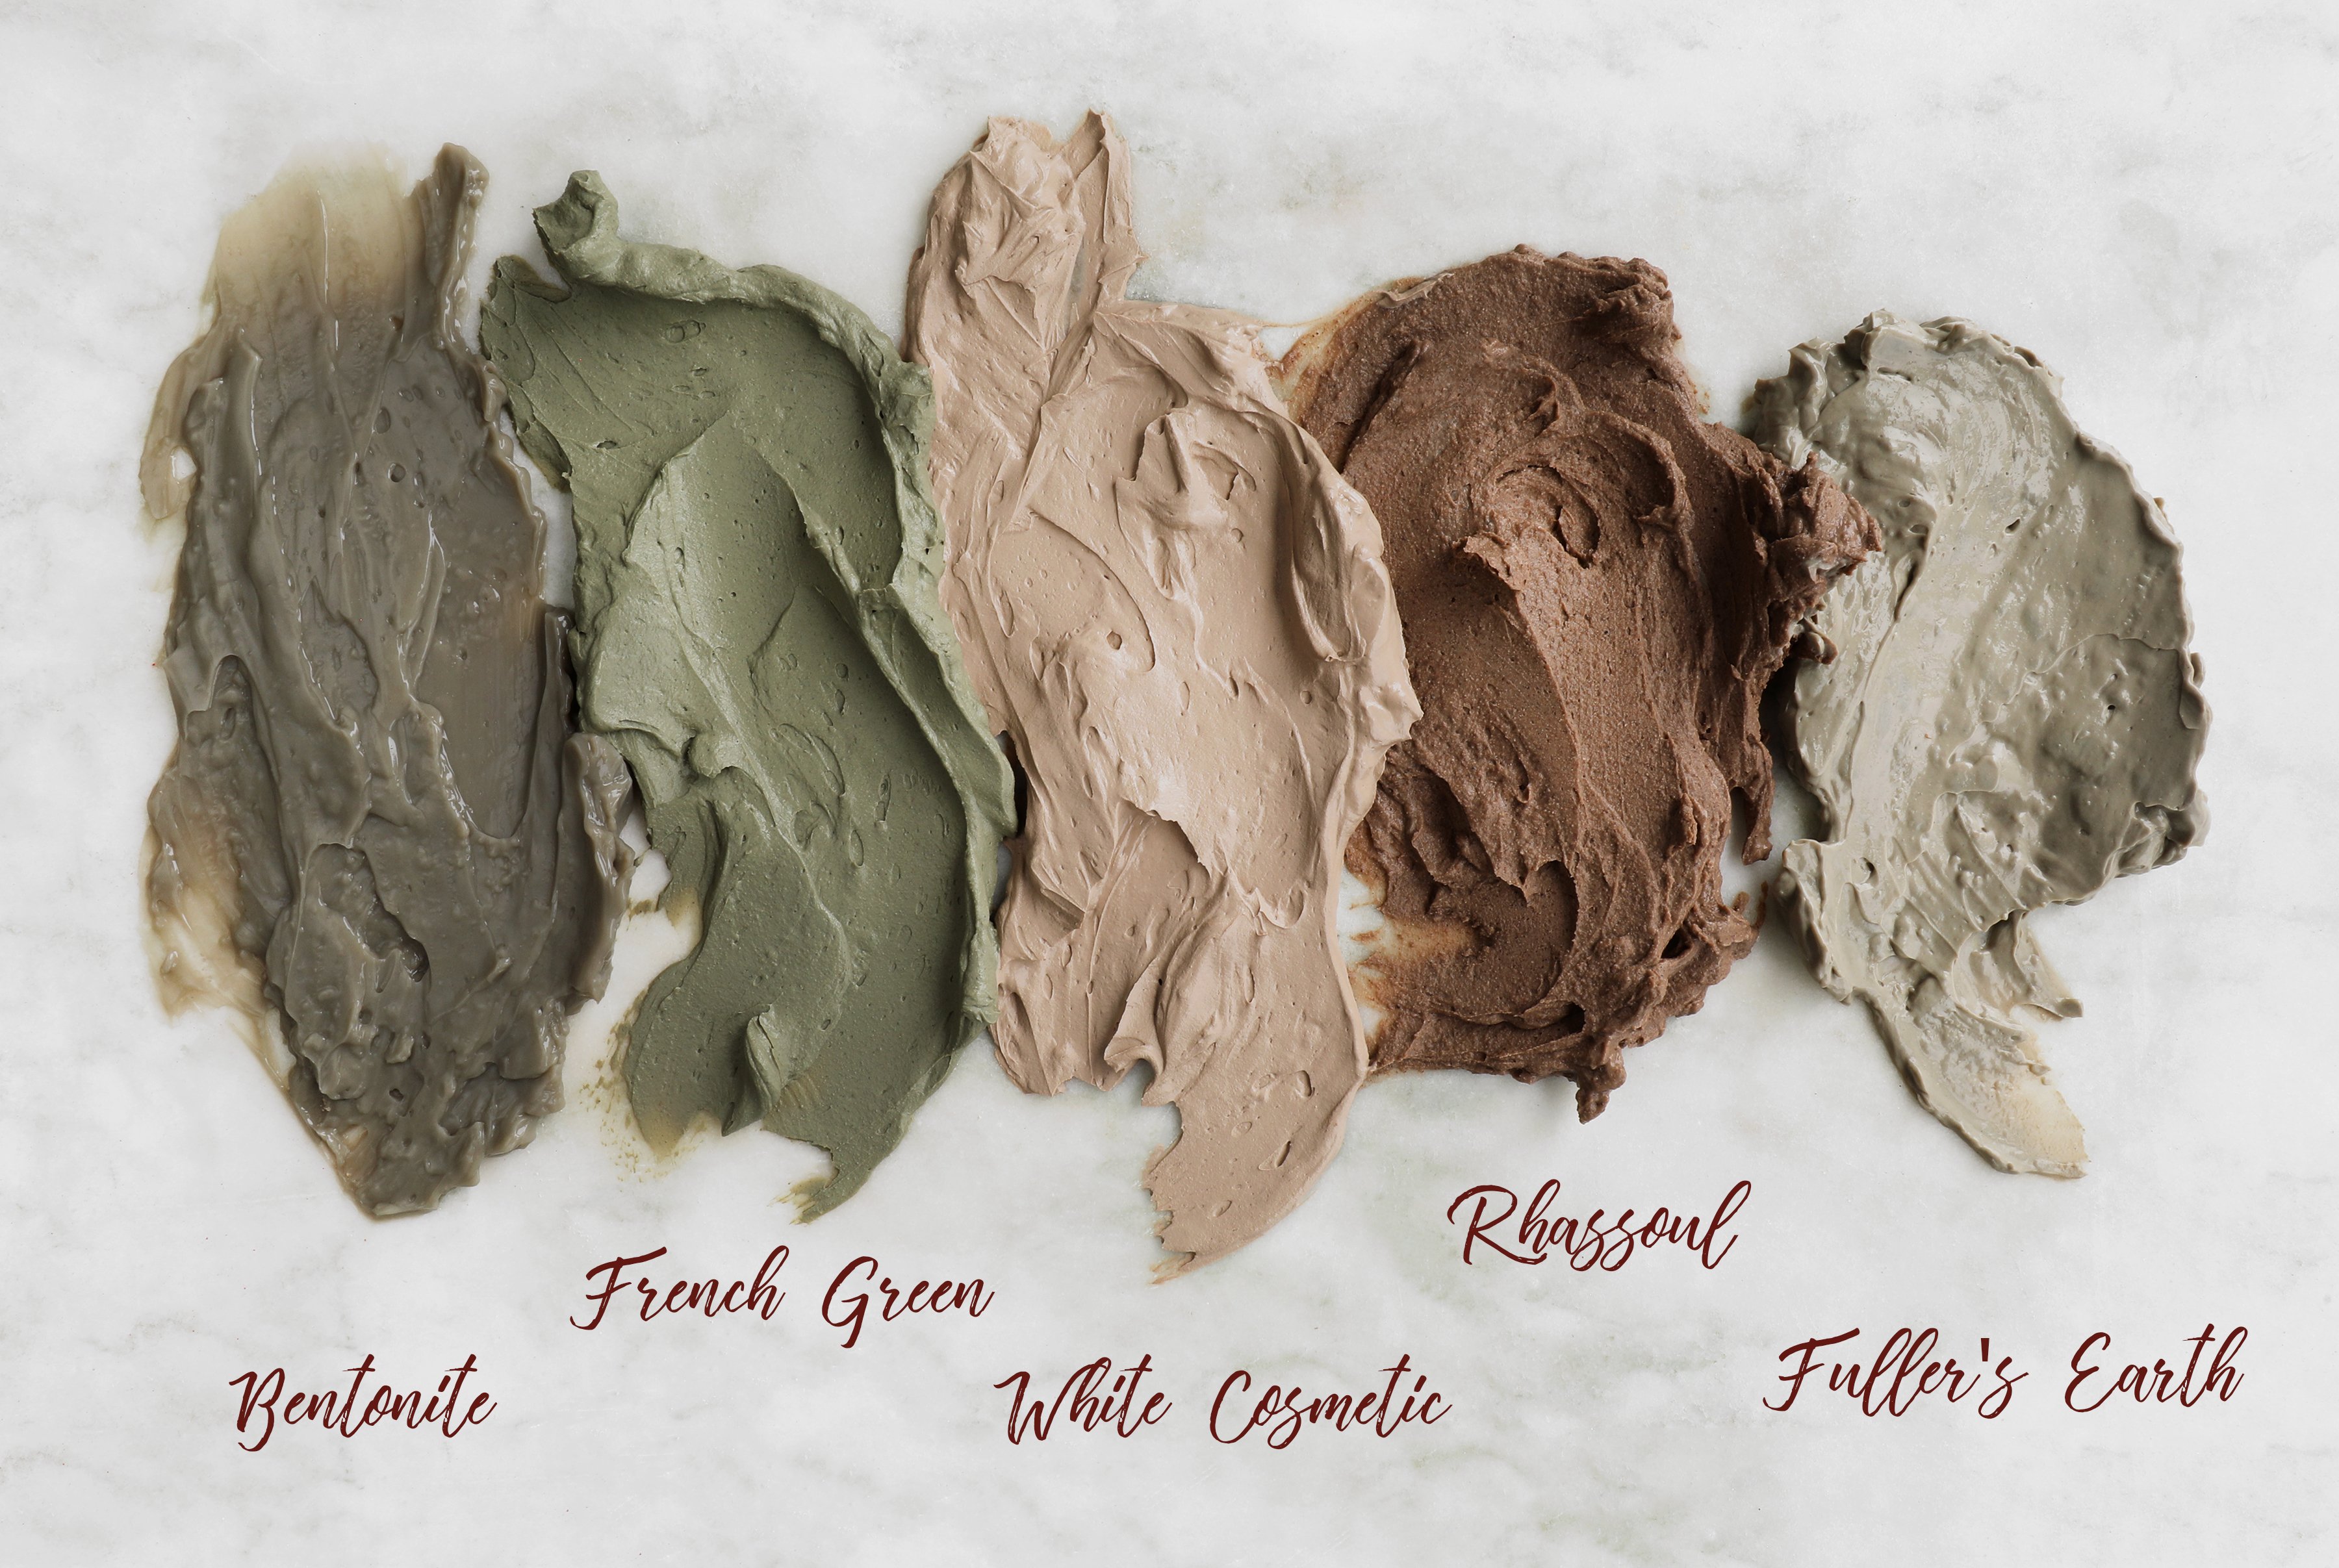 Kaolin vs Bentonite Clay: Which is Better?